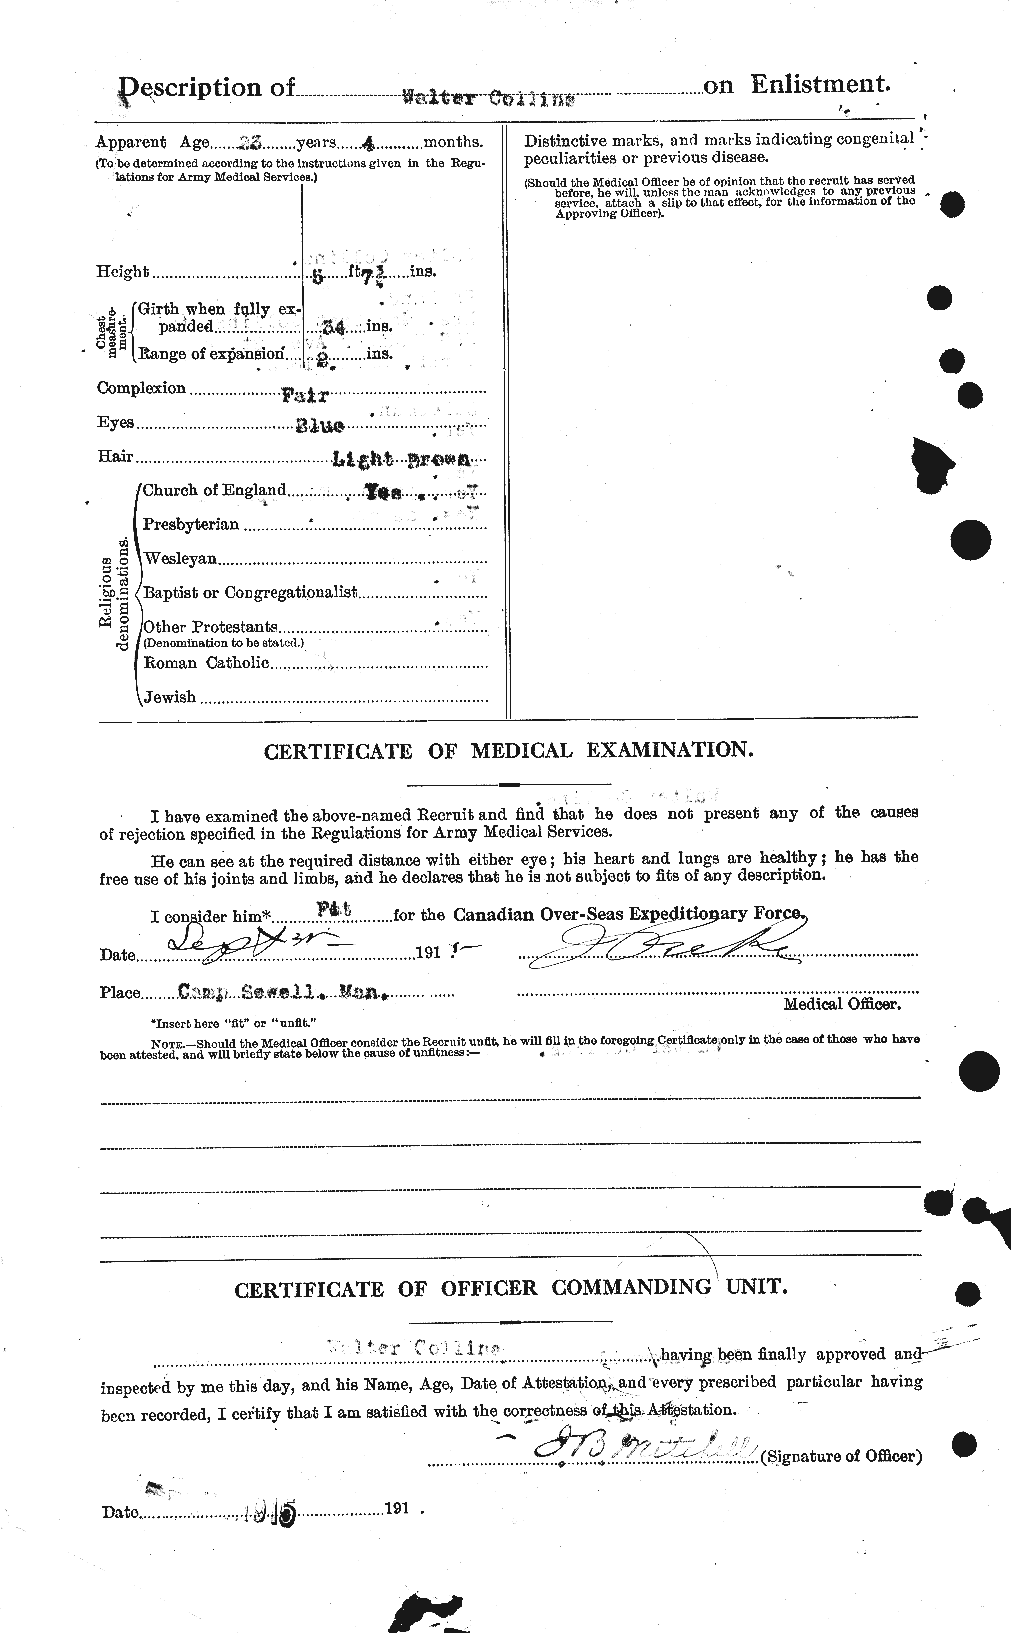 Personnel Records of the First World War - CEF 068837b